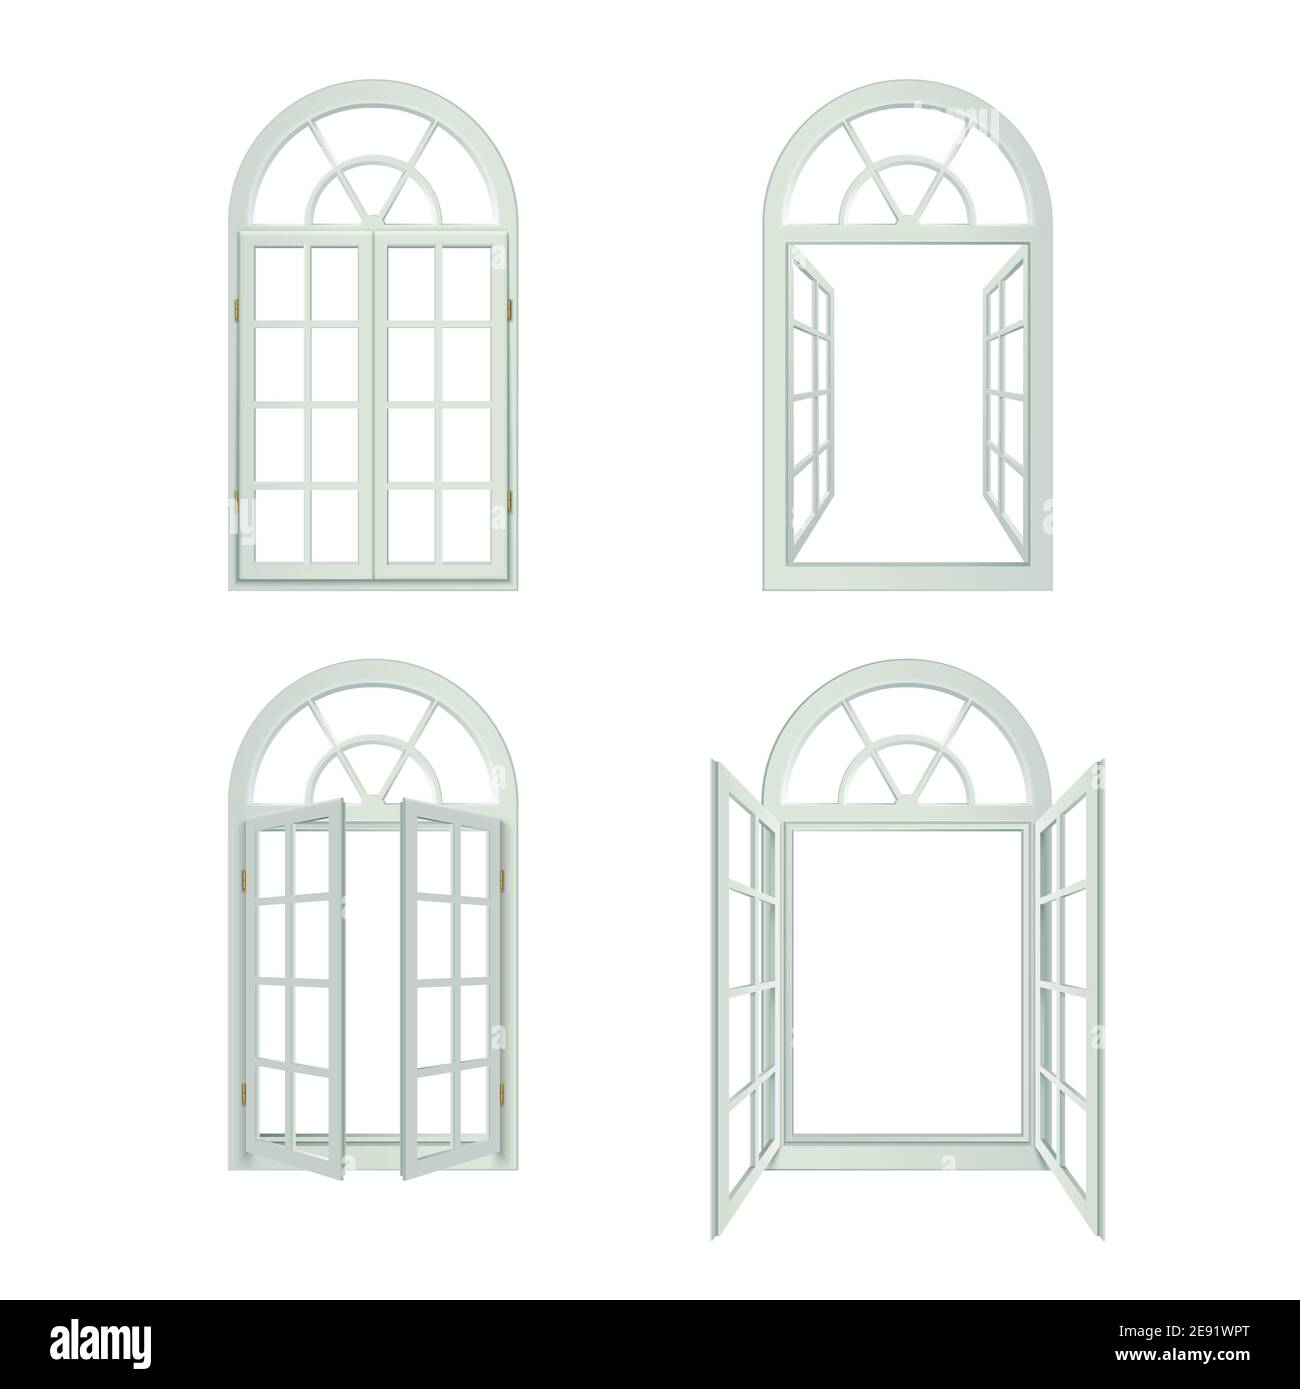 Arched Windows Icons Set. Arched Windows Vector Illustration.Arched Windows Decorative Set.  Arched Windows Design Set. Arched Windows Realistic Isola Stock Vector